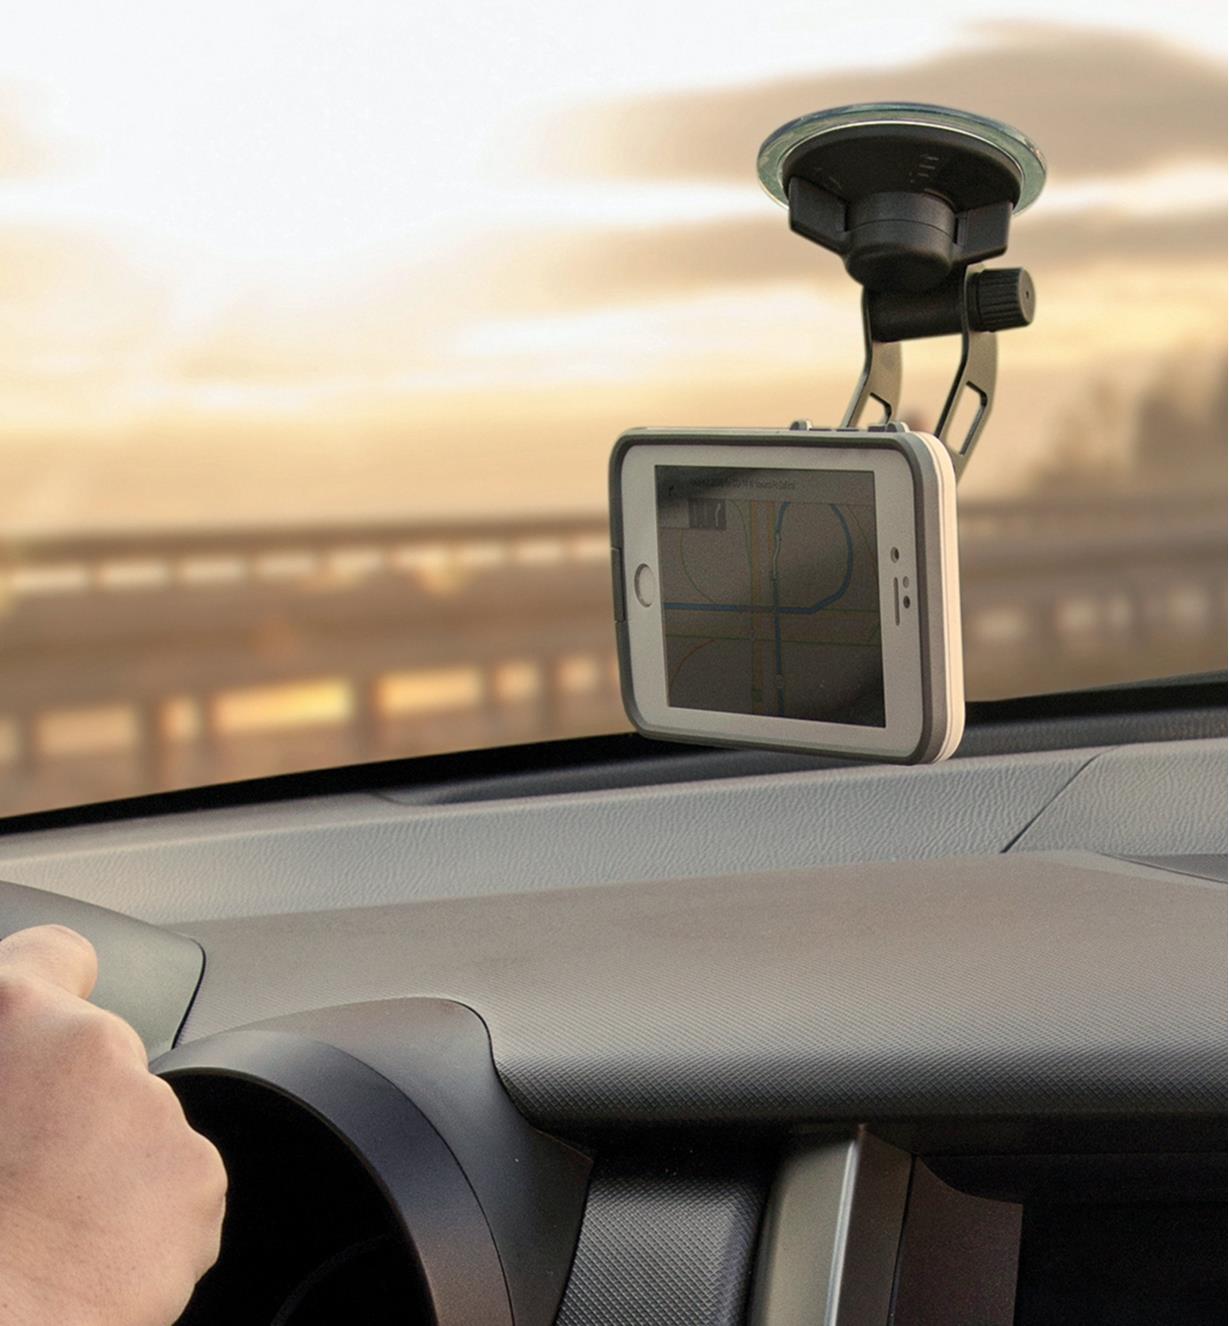 Windshield-Mount Kit installed on a car windshield with a cell phone attached